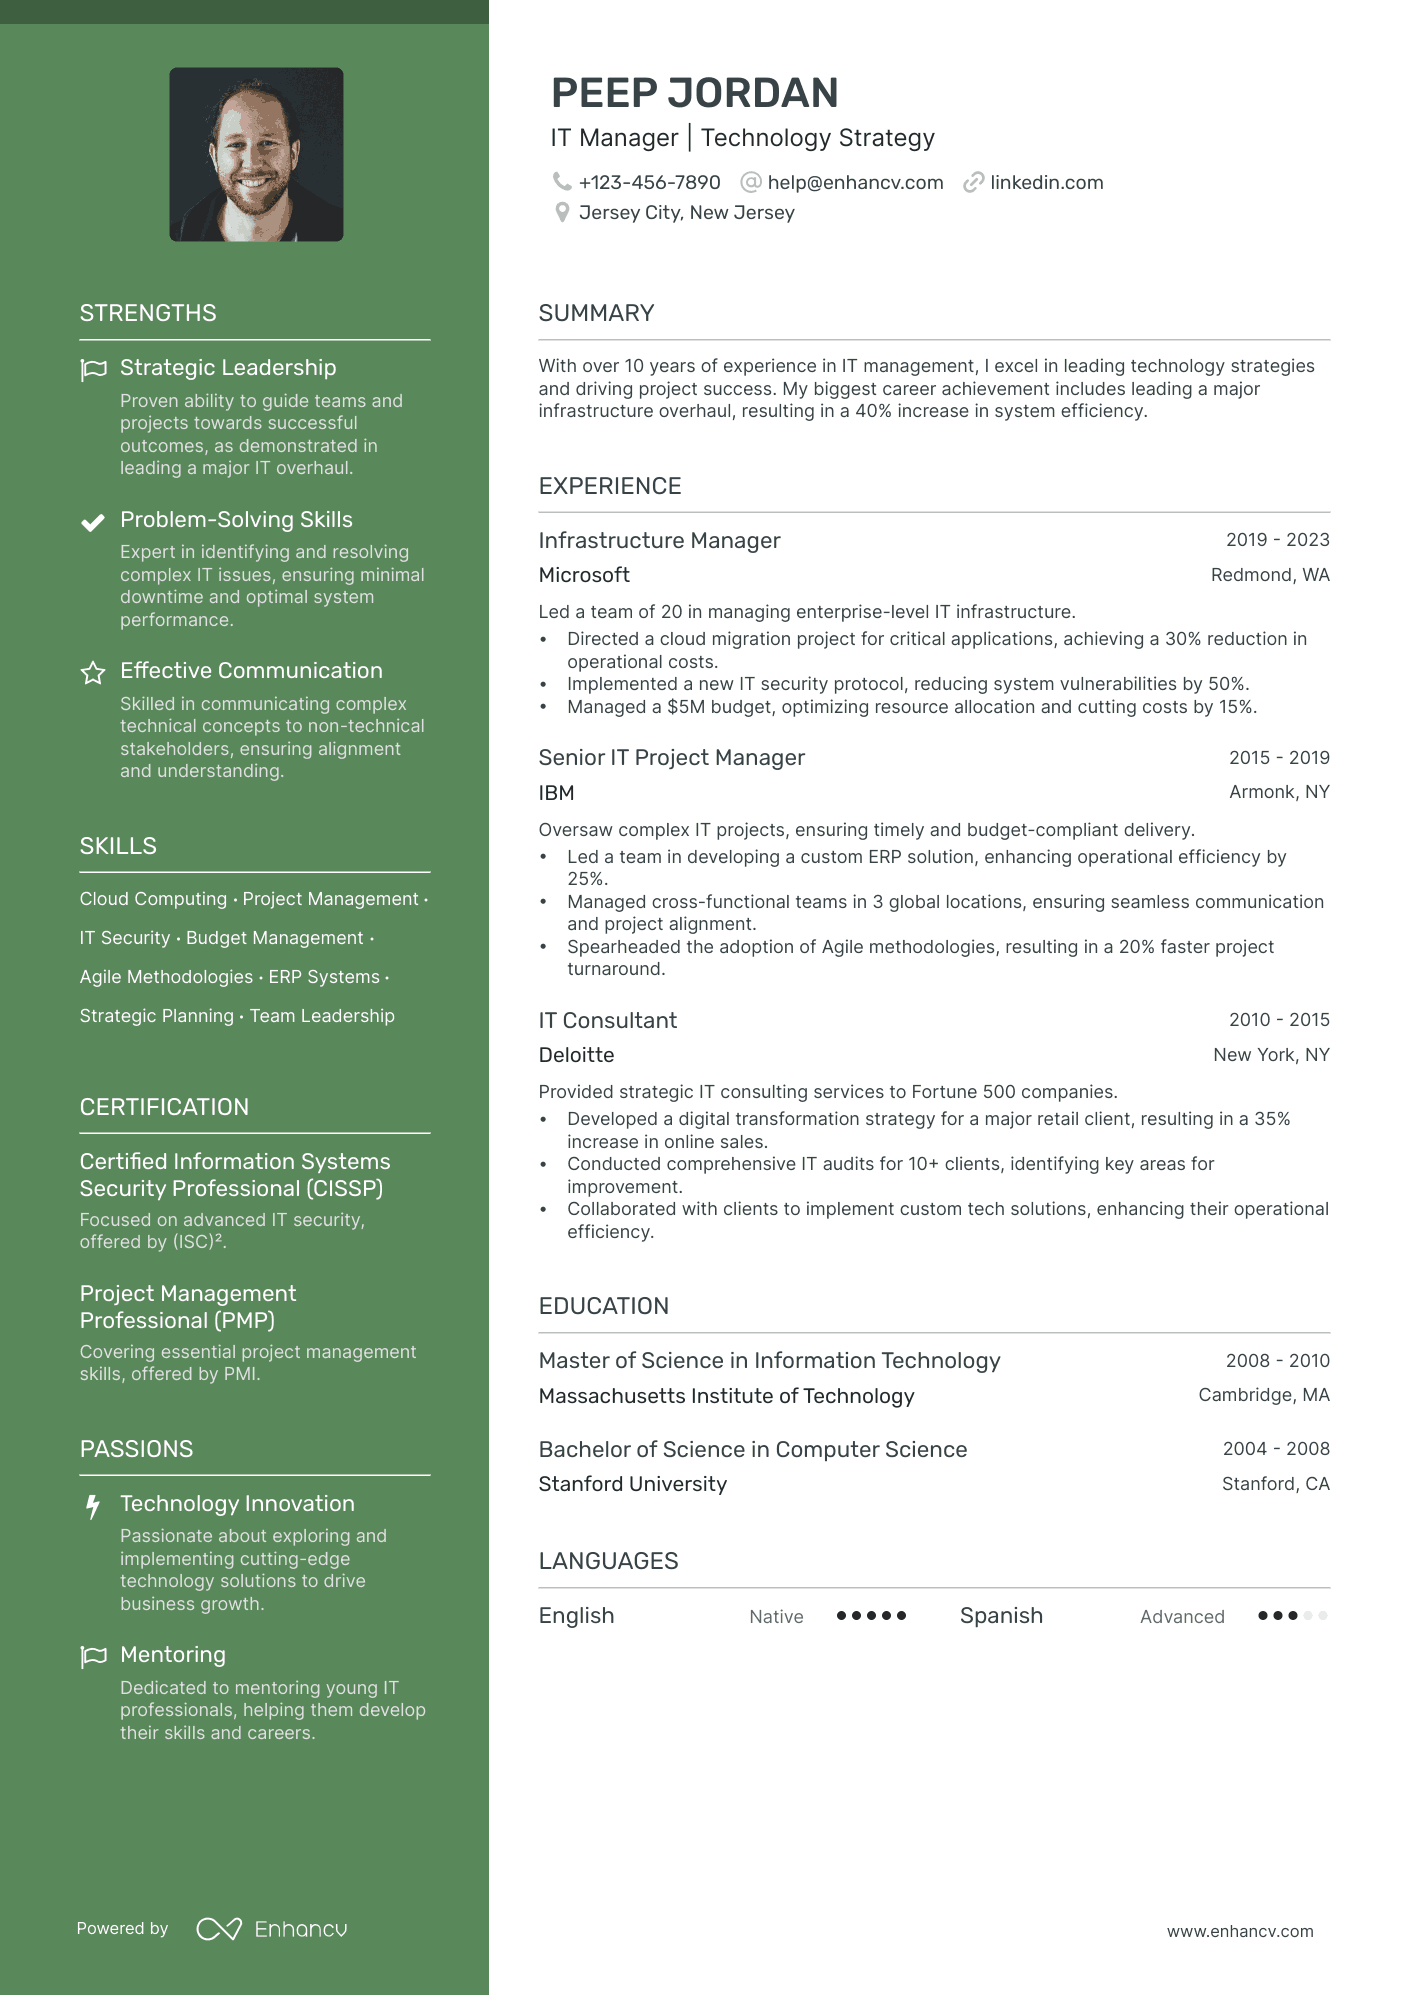 IT Manager | Technology Strategy resume example